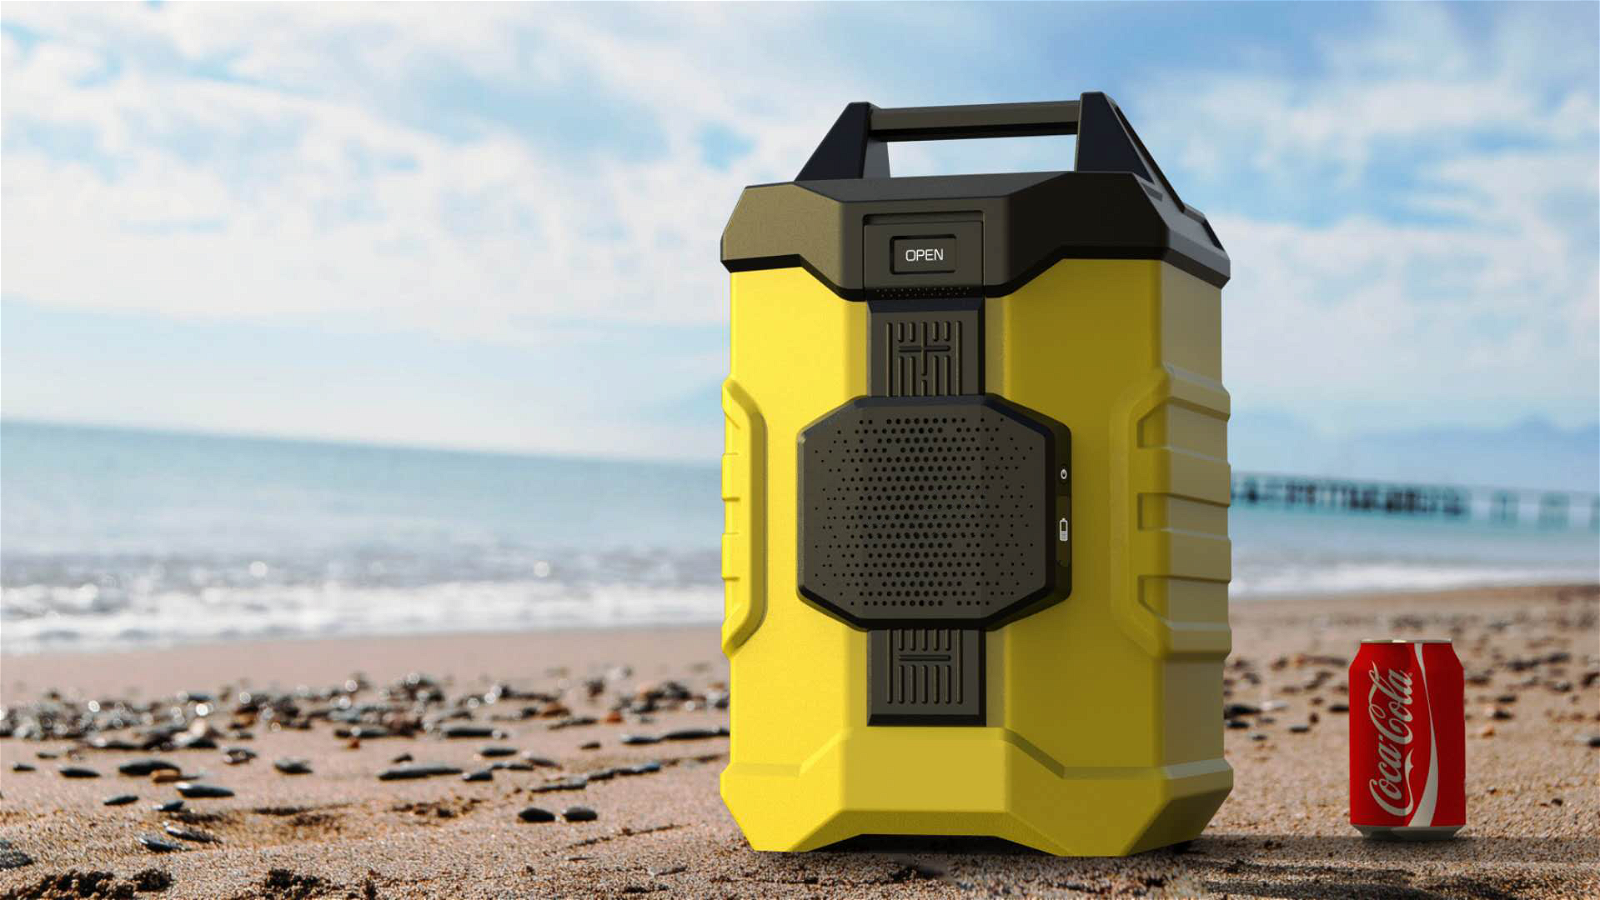 New multifunctional Cooler Box with Bluetooth speaker and battery